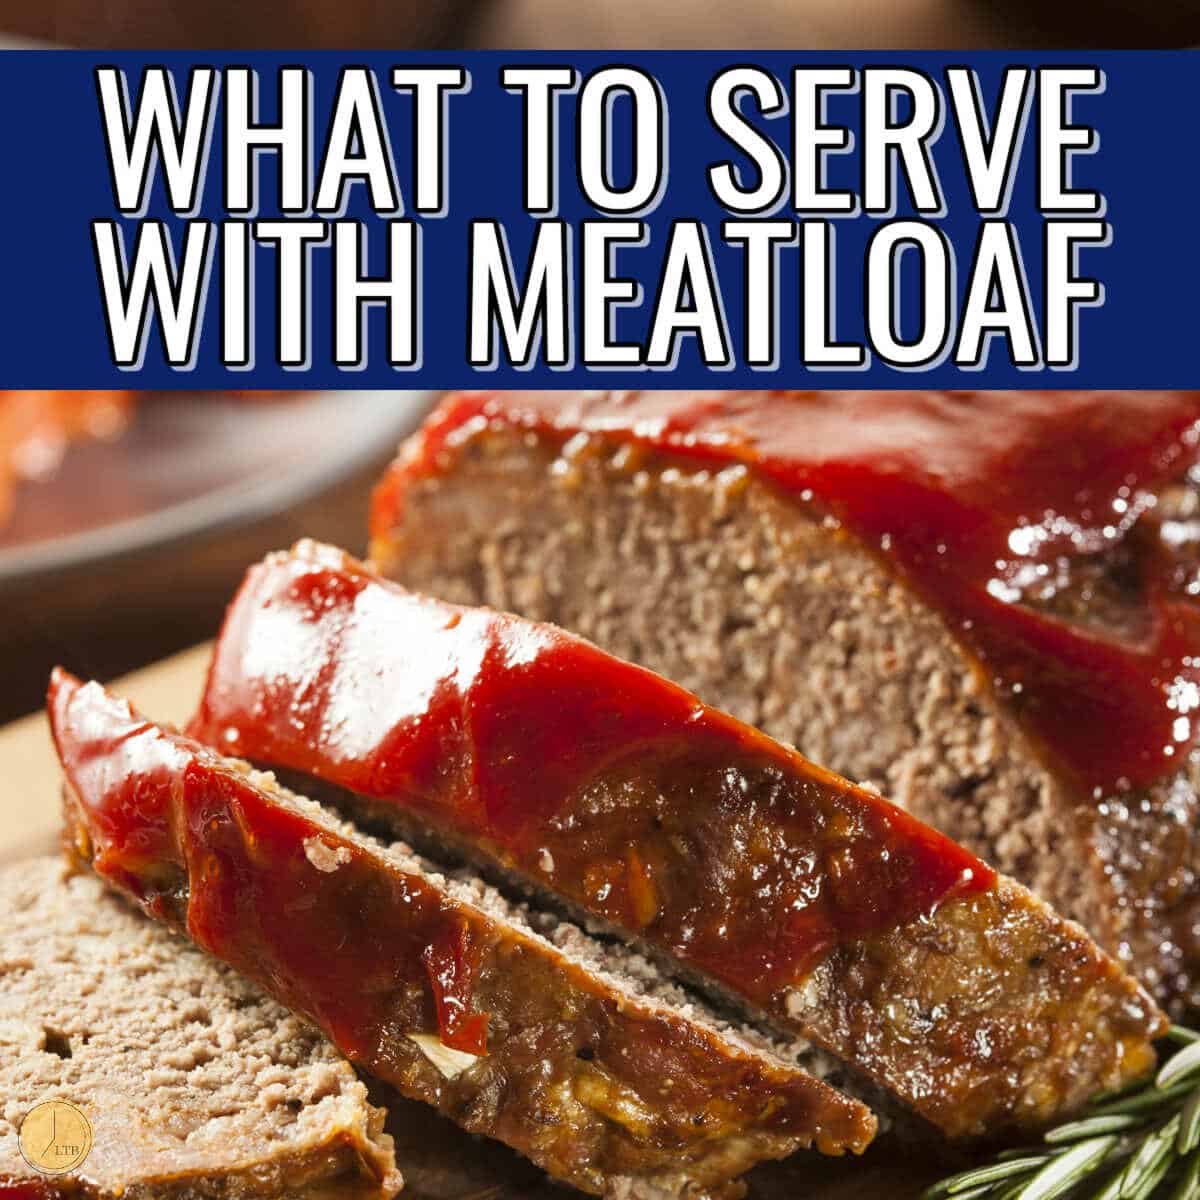 what to serve with meatloaf title banner